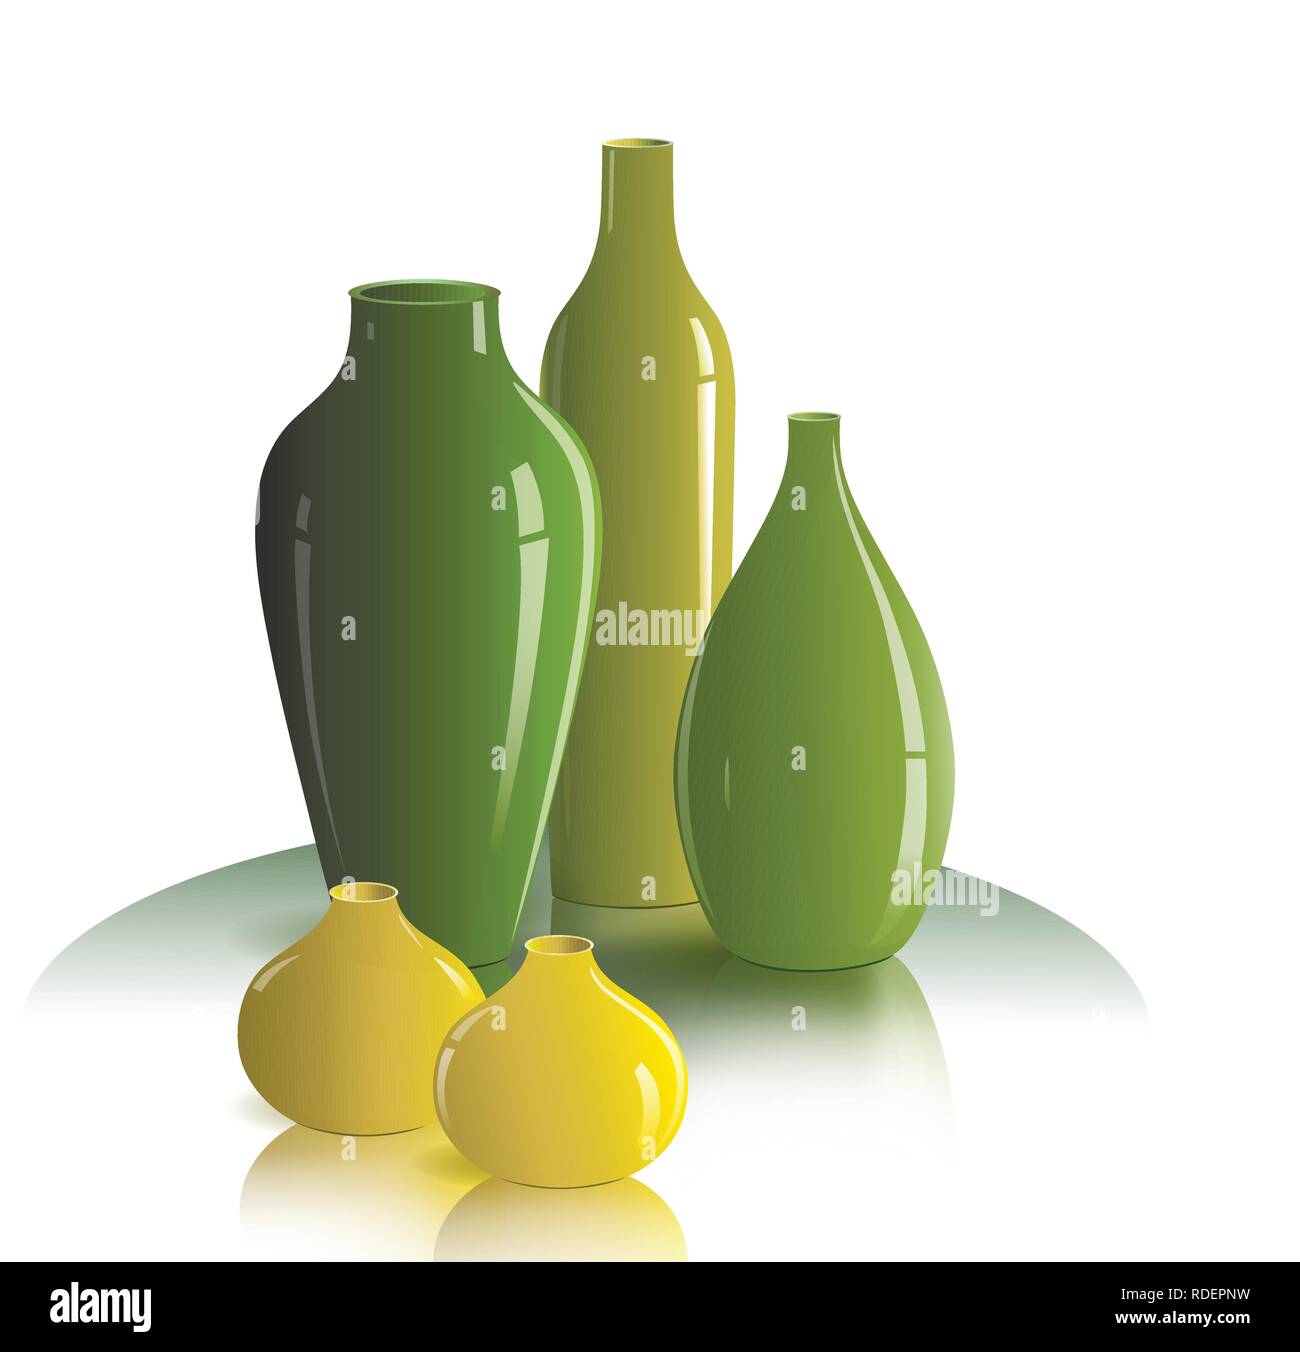 The illustration shows the still life on the table of several vases colors  green and yellow. Original solution for the interior design Stock Vector  Image & Art - Alamy